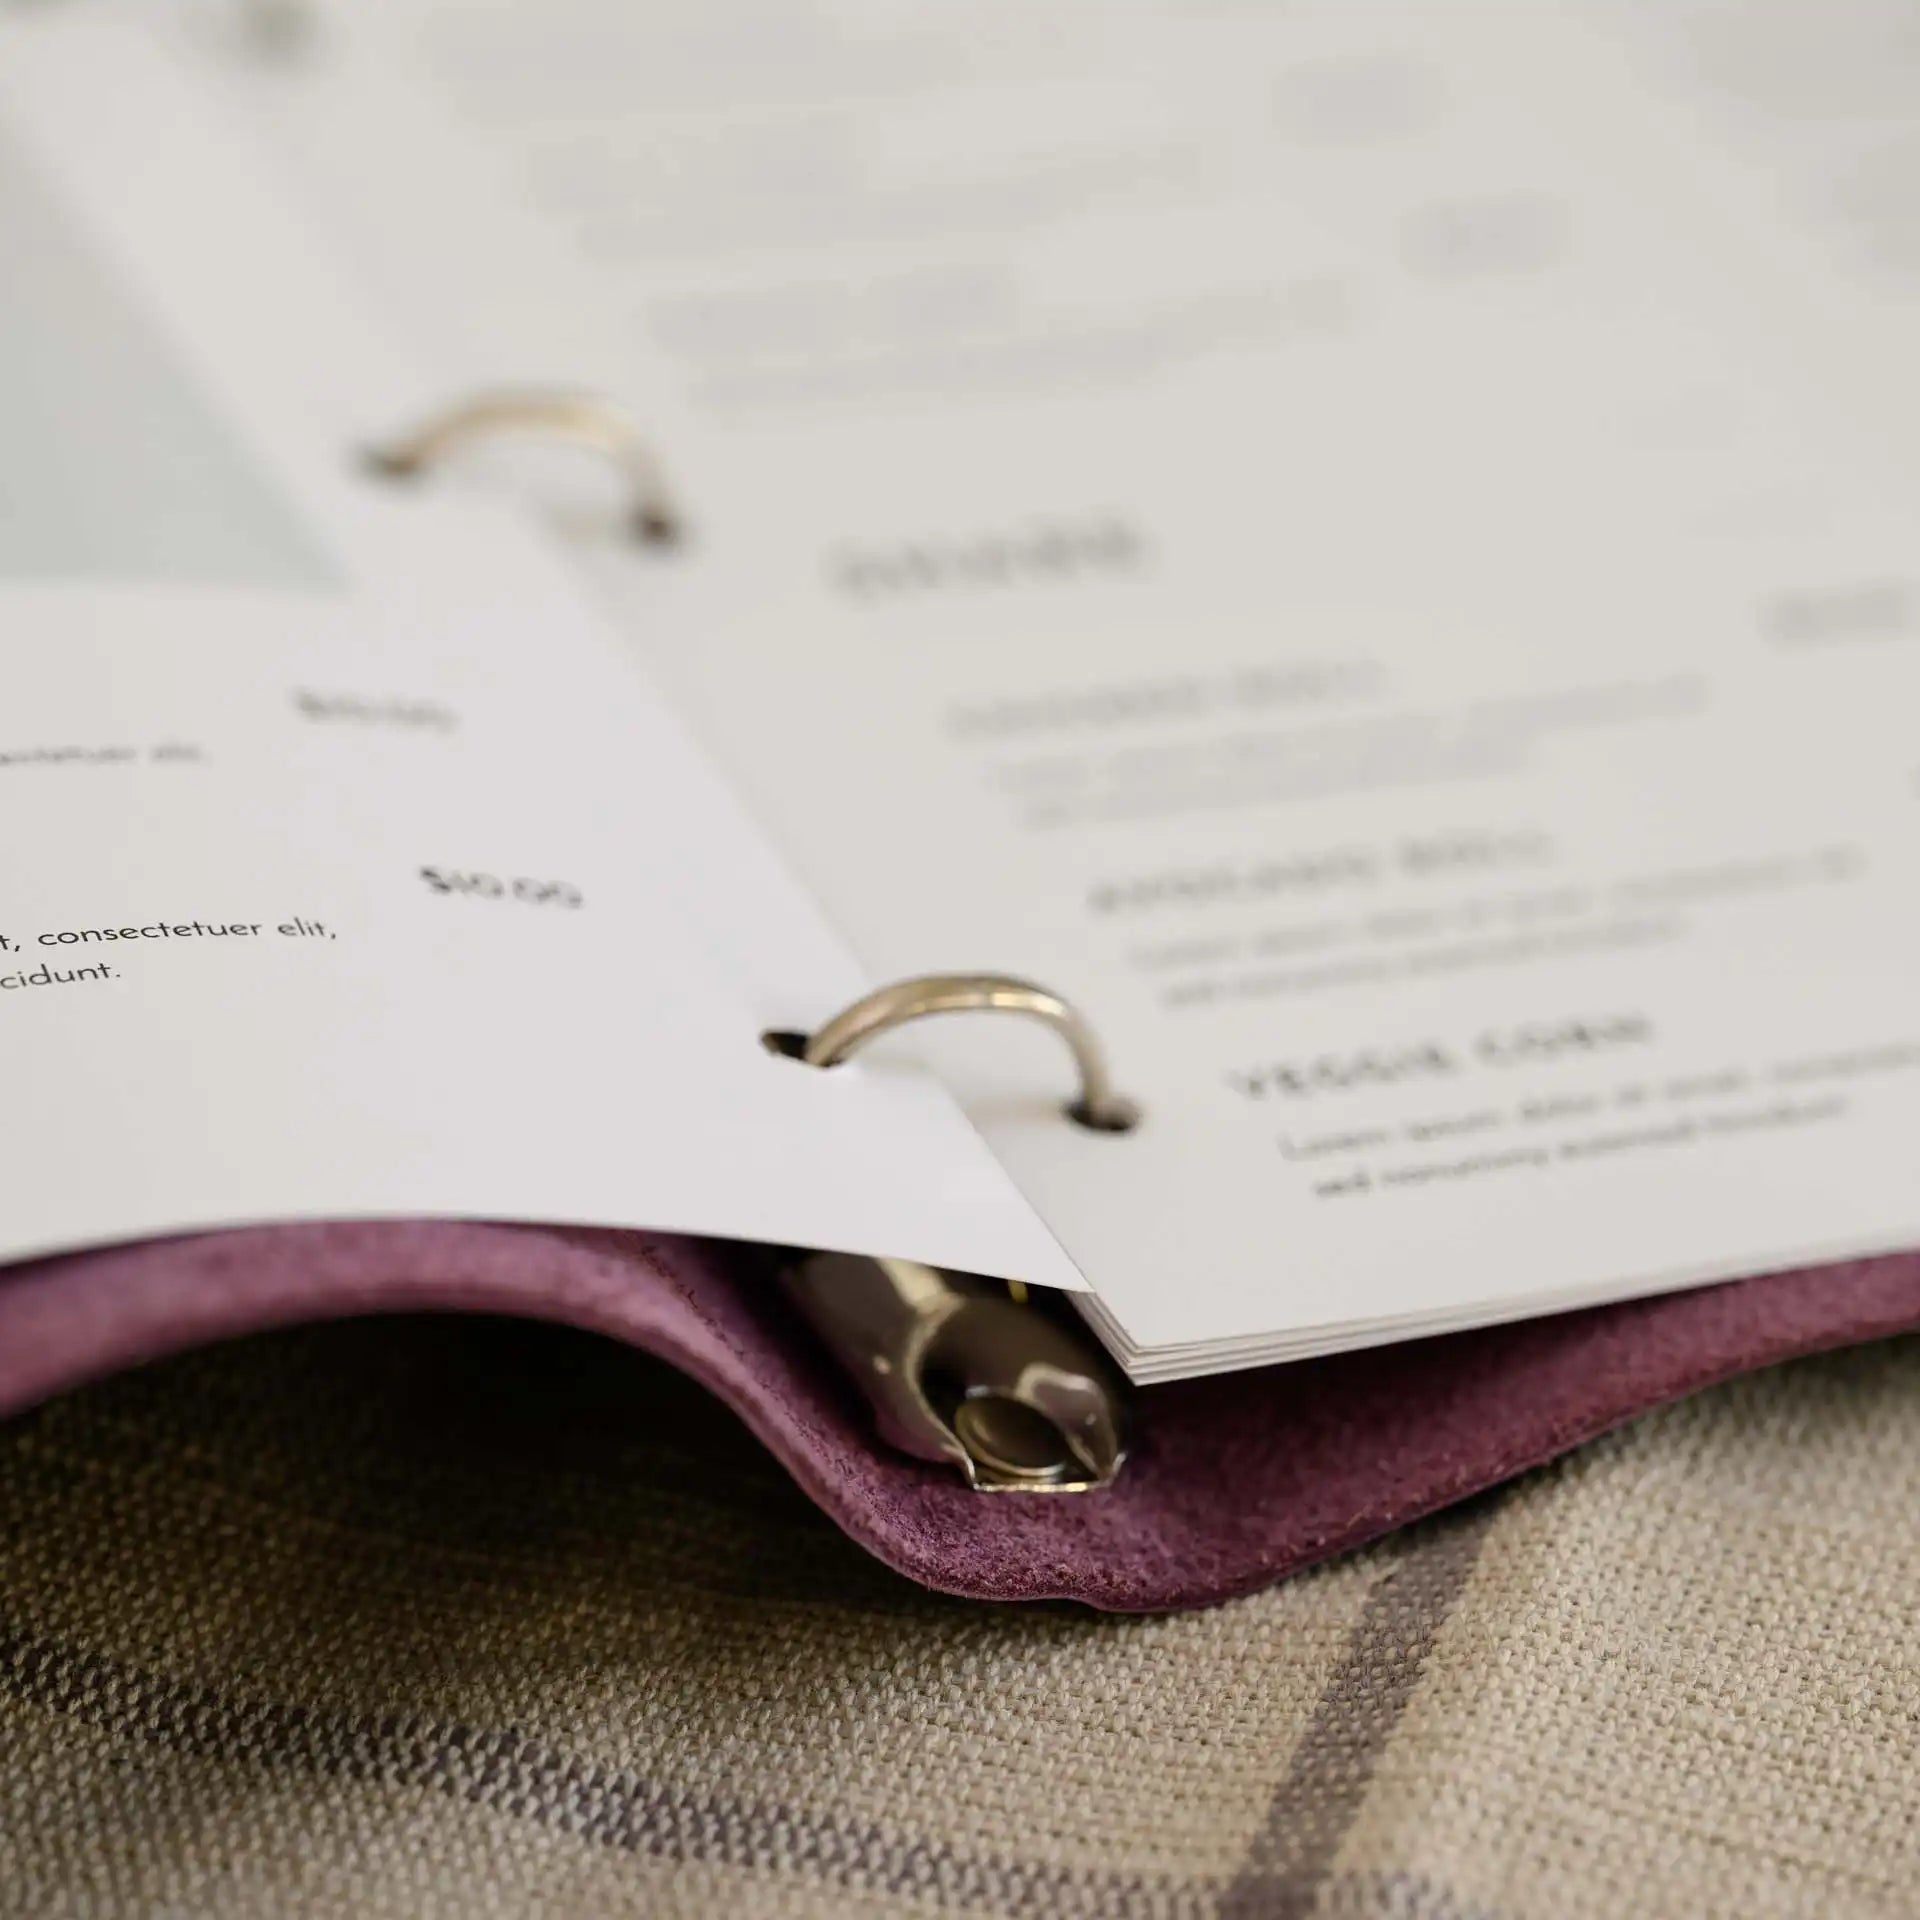 Tailored Custom Menu Folio, designed to impress your guests with its uniqueness, adds a personalized touch to your restaurant's ambiance.